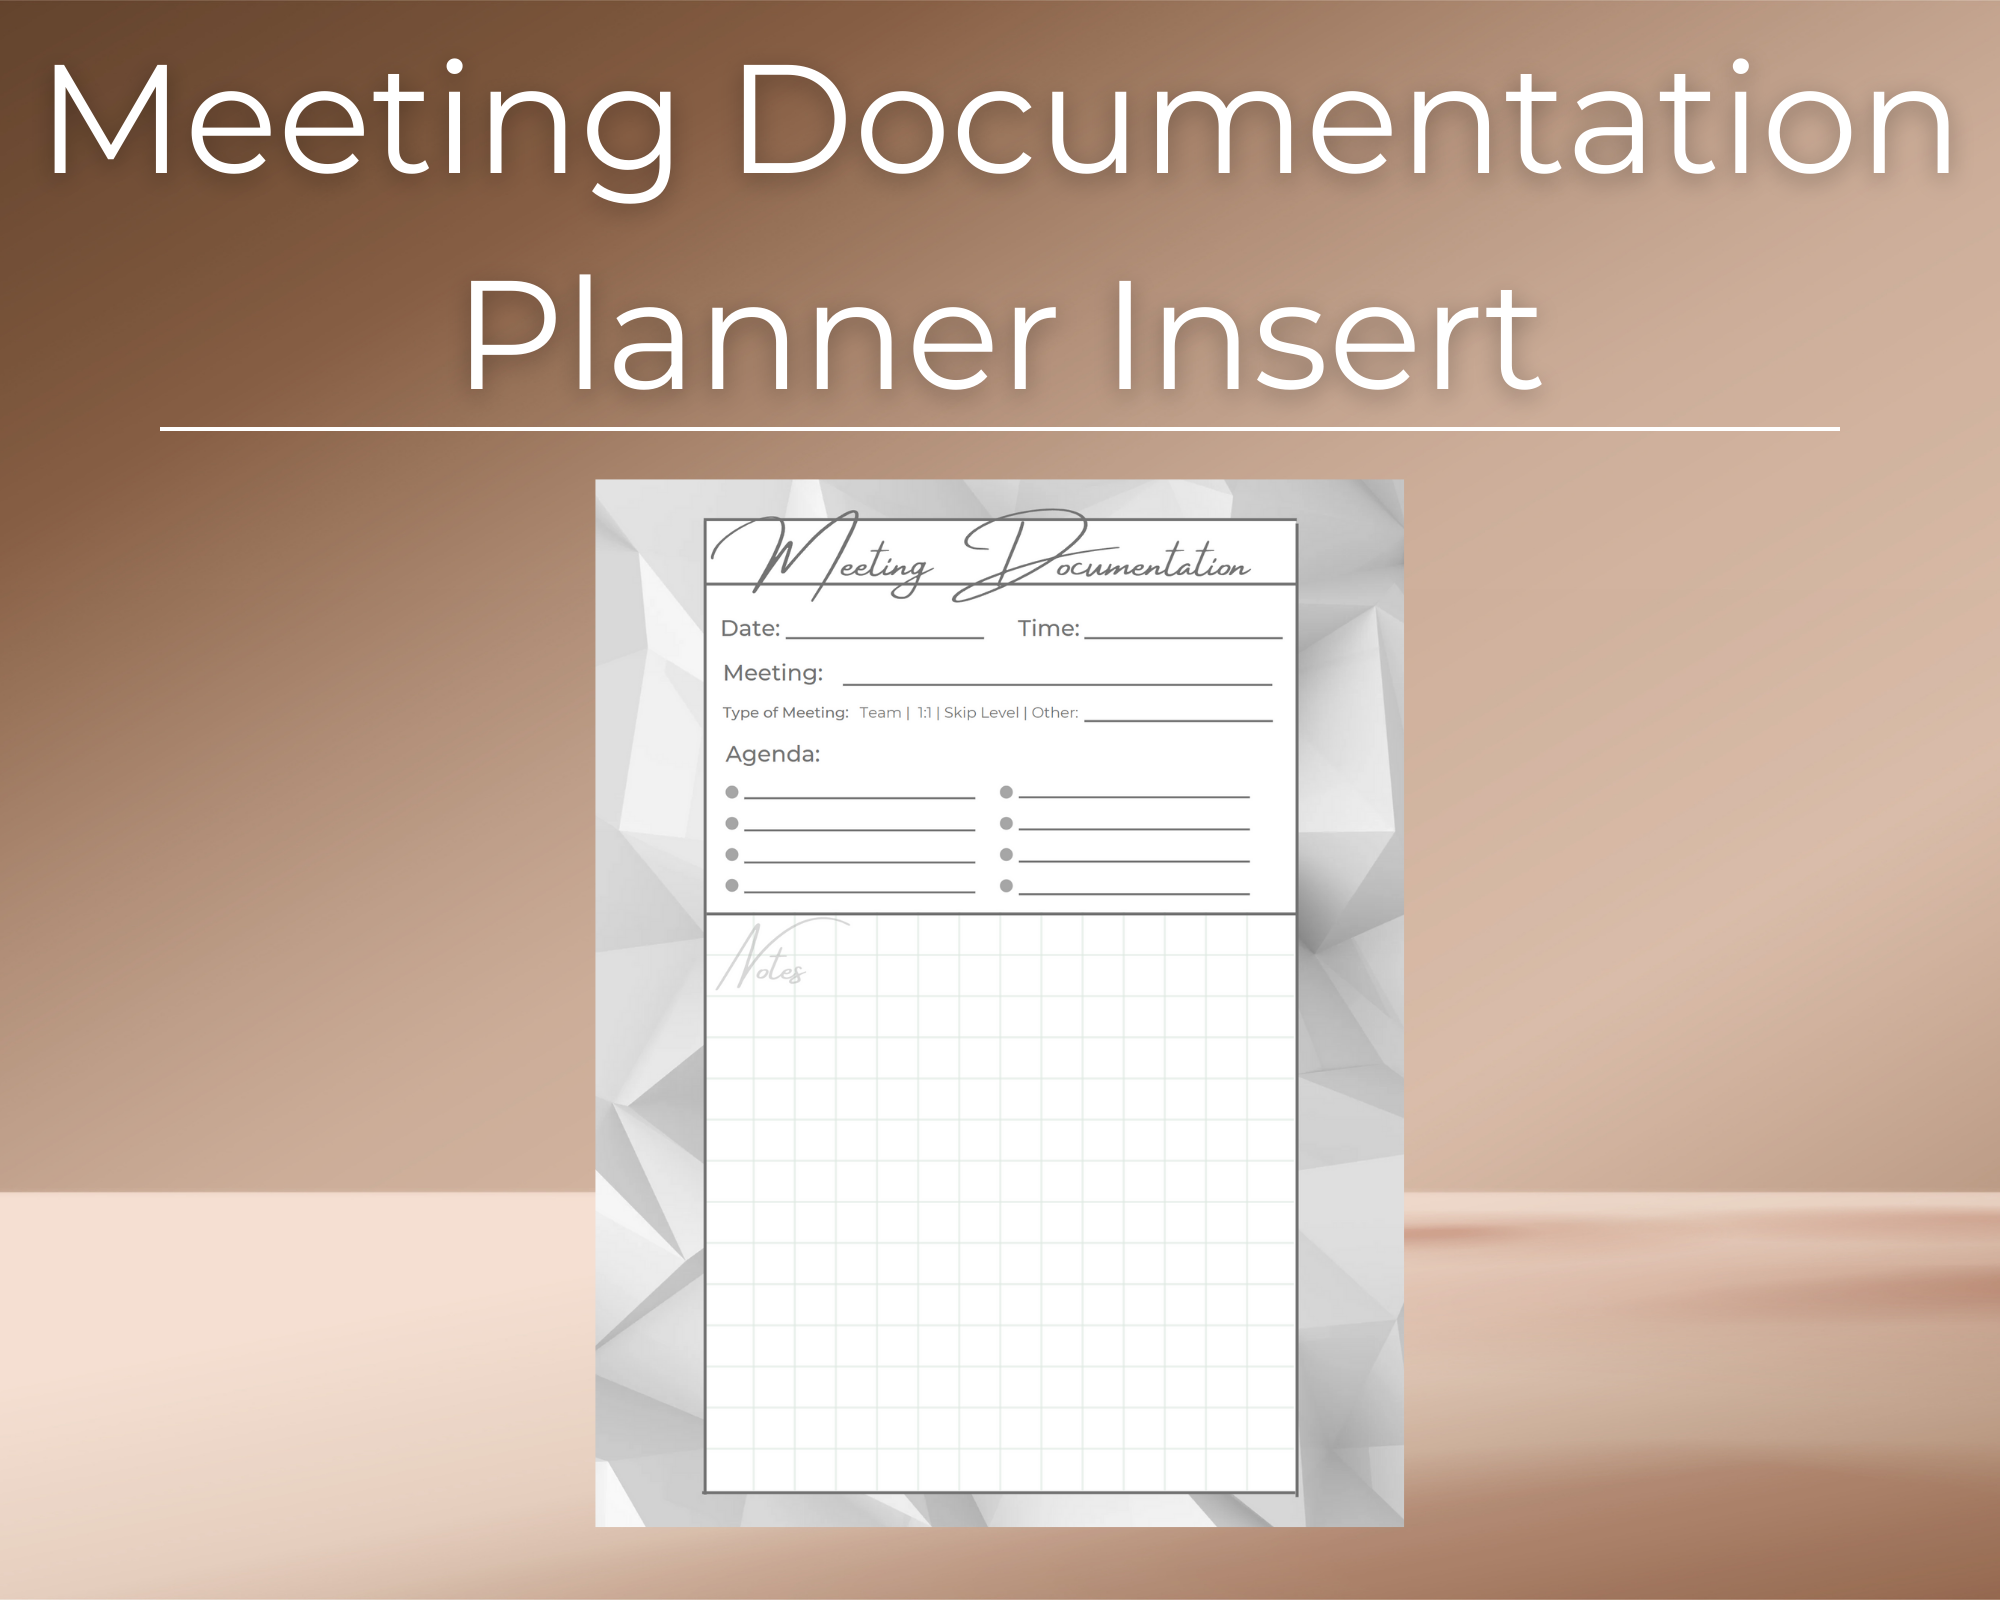 A6 Inserts : Group Project Plan Student Project Planner 